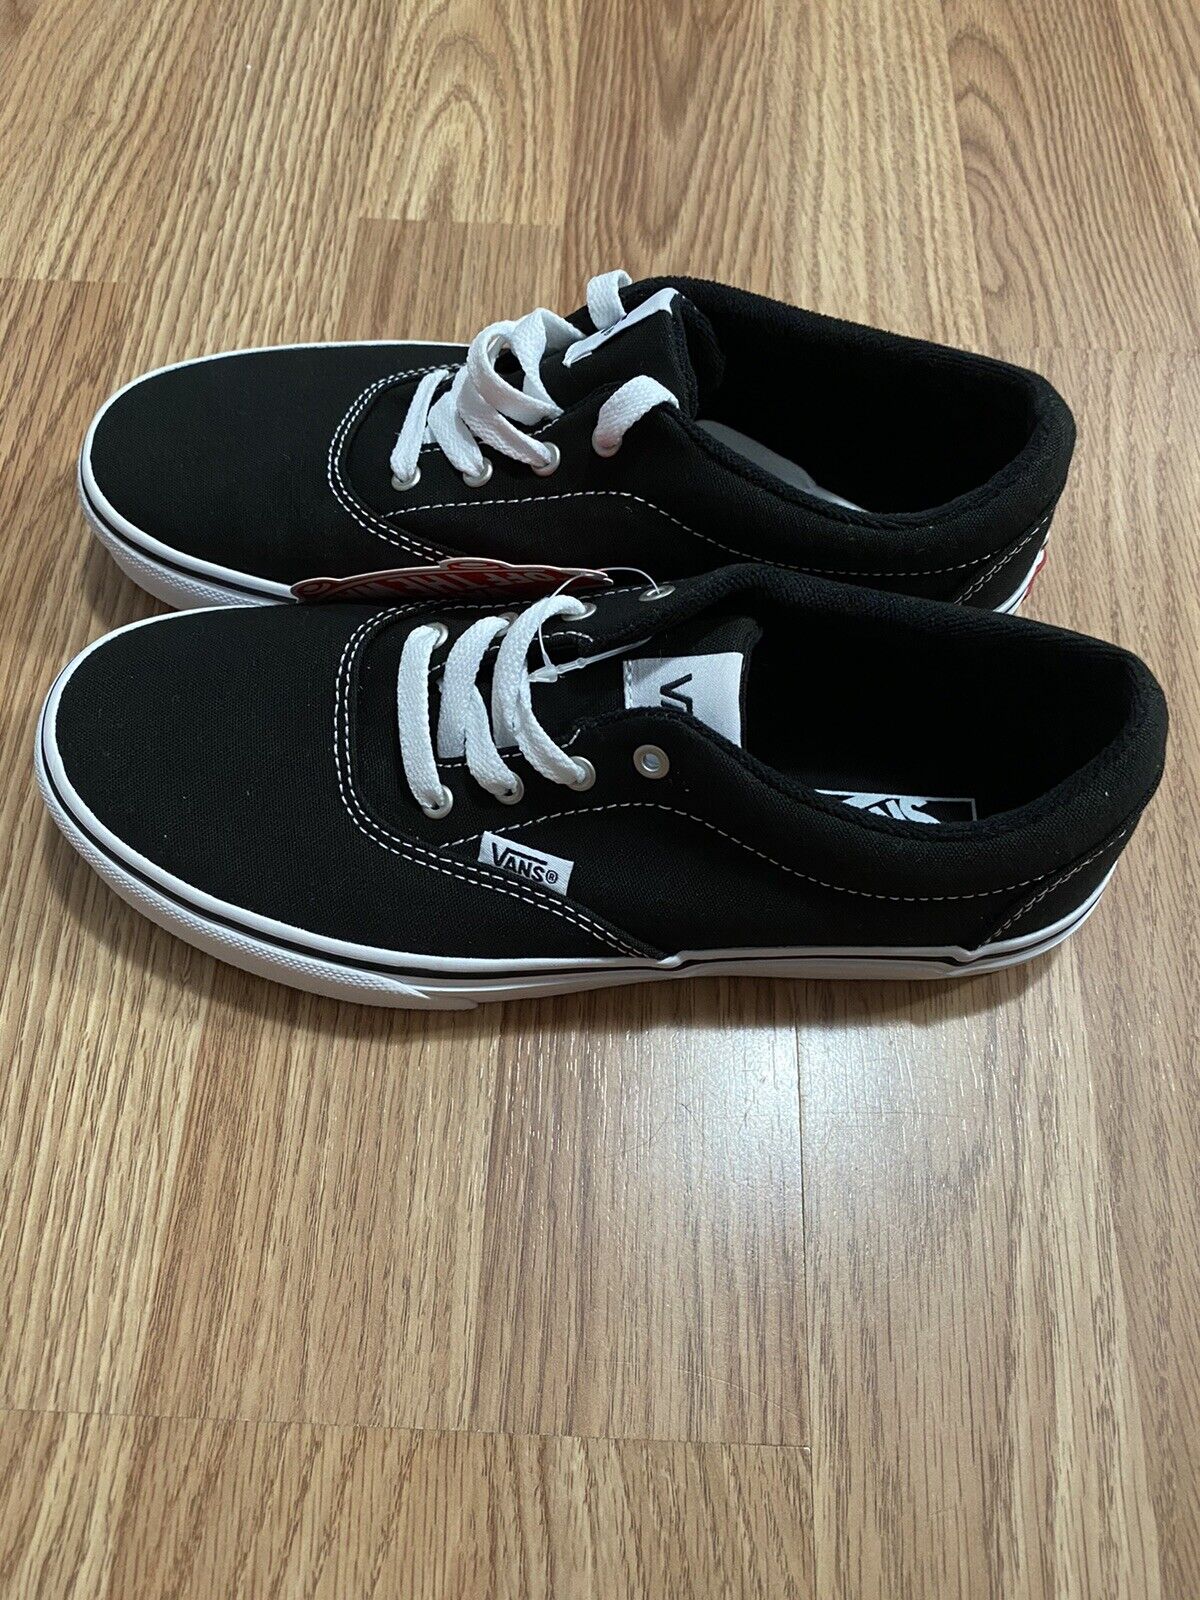 Authentic Youth Size 5 Black Low Top Up Sneakers Kids | eBay